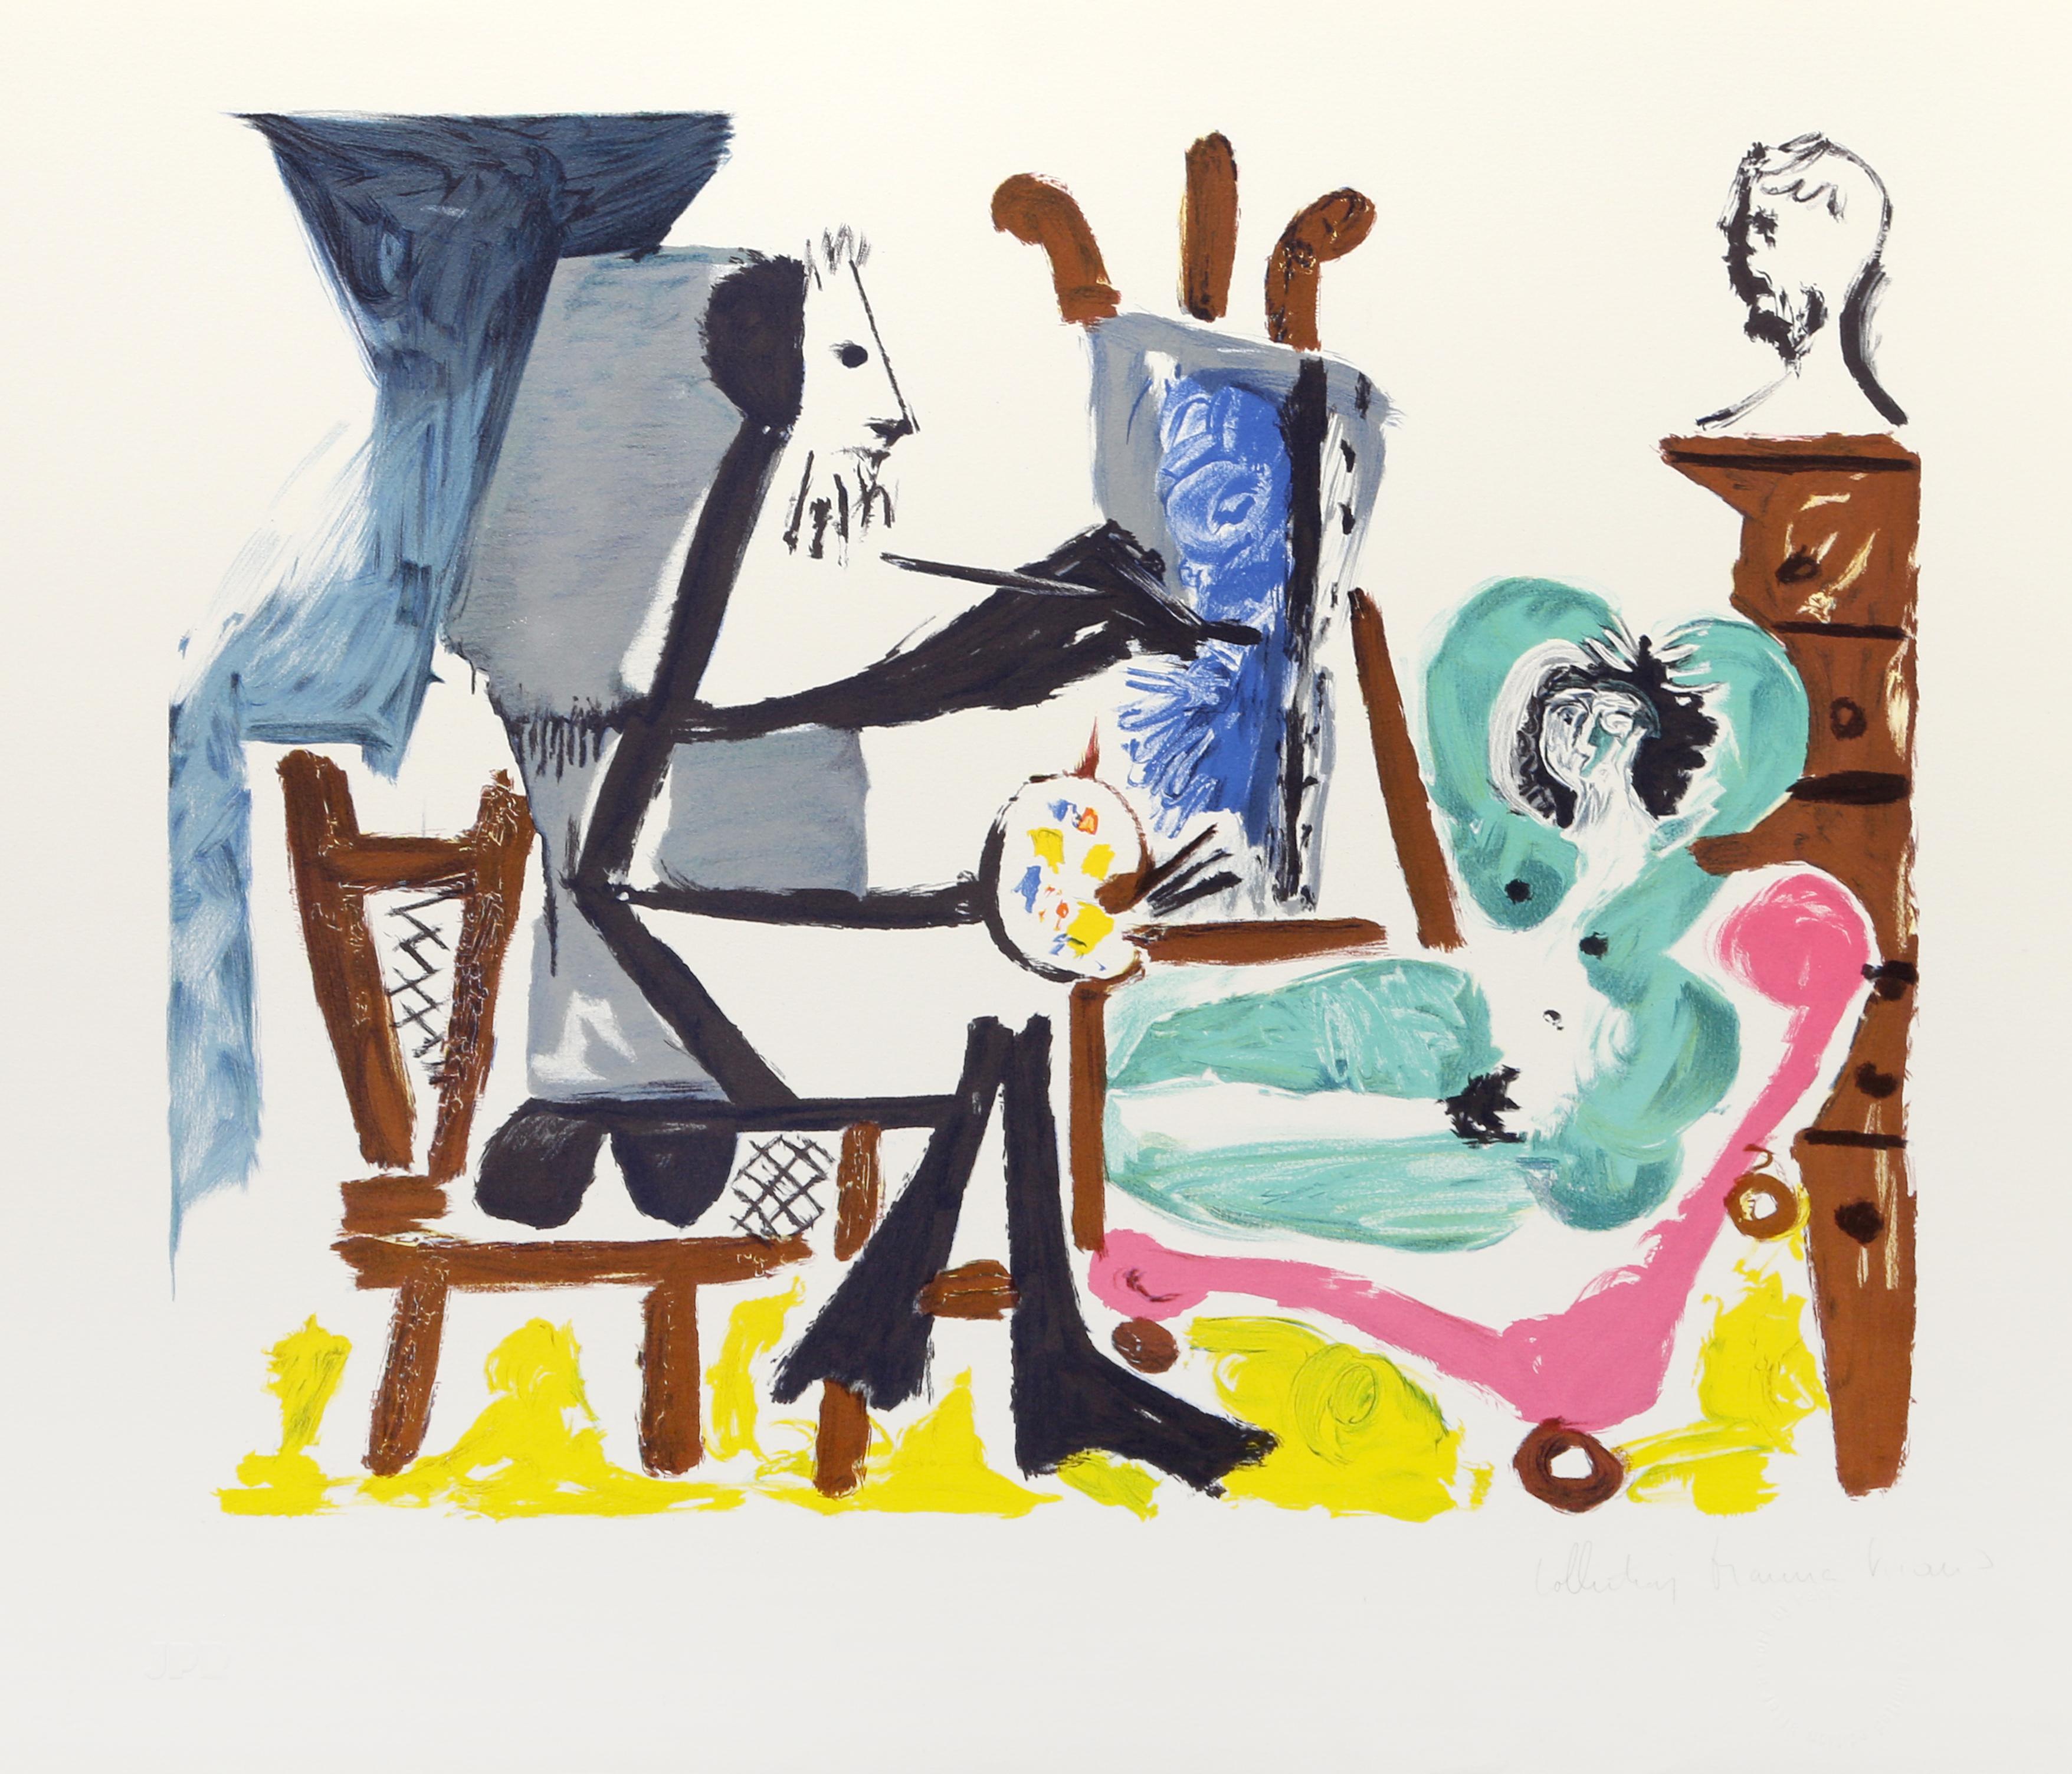 Pablo Picasso's print features a painter in his studio capturing the likeness of a nude woman posing on a setee or chaise lounge. Sitting at his easel, the painter uses blue paint on his canvas, while the woman reclines with her arms above her head